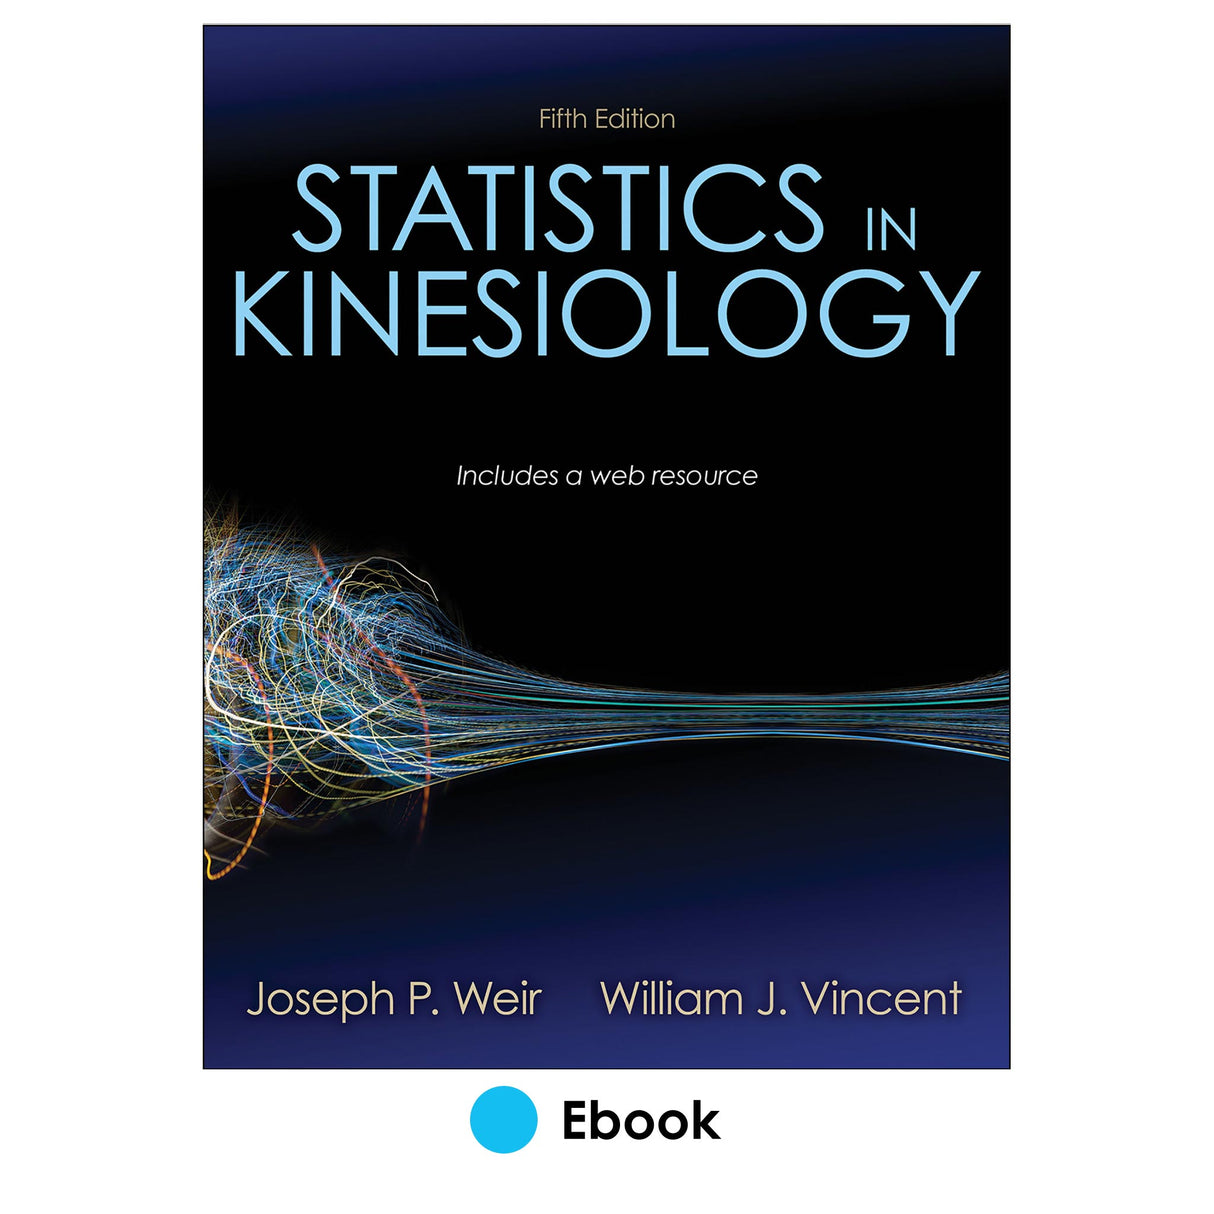 Statistics in Kinesiology 5th Edition epub With Web Resource